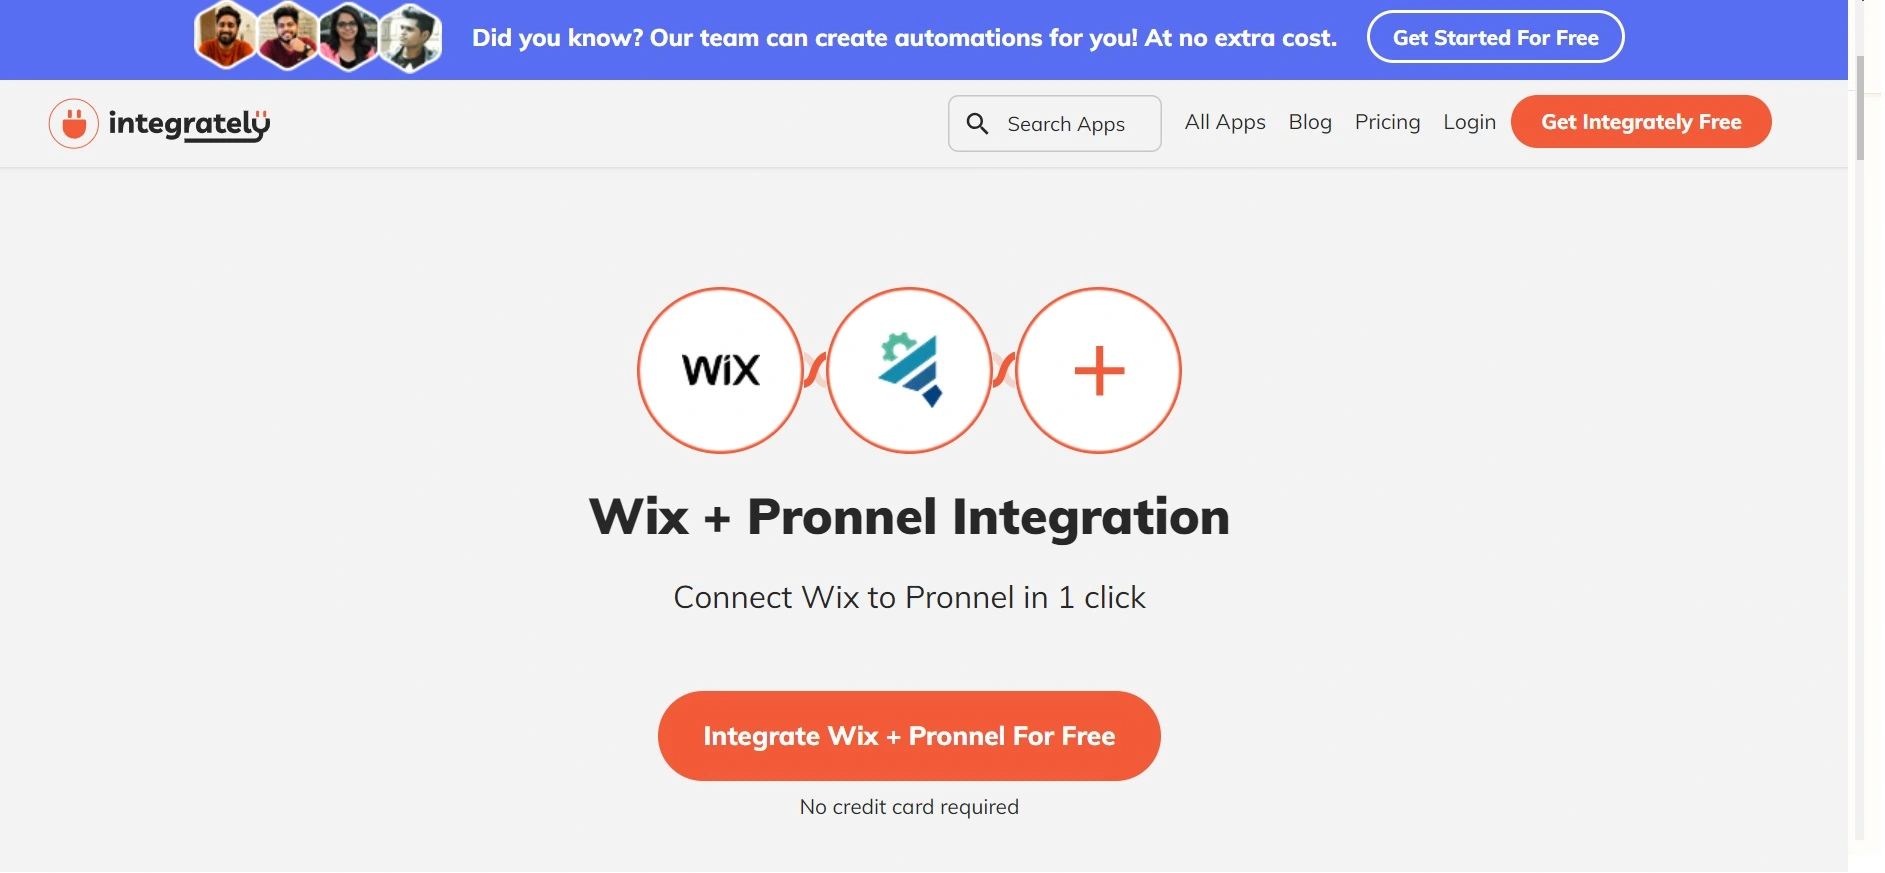 Single Click Integration of Your Wix websites forms with Pronnel CRM through Integrately.